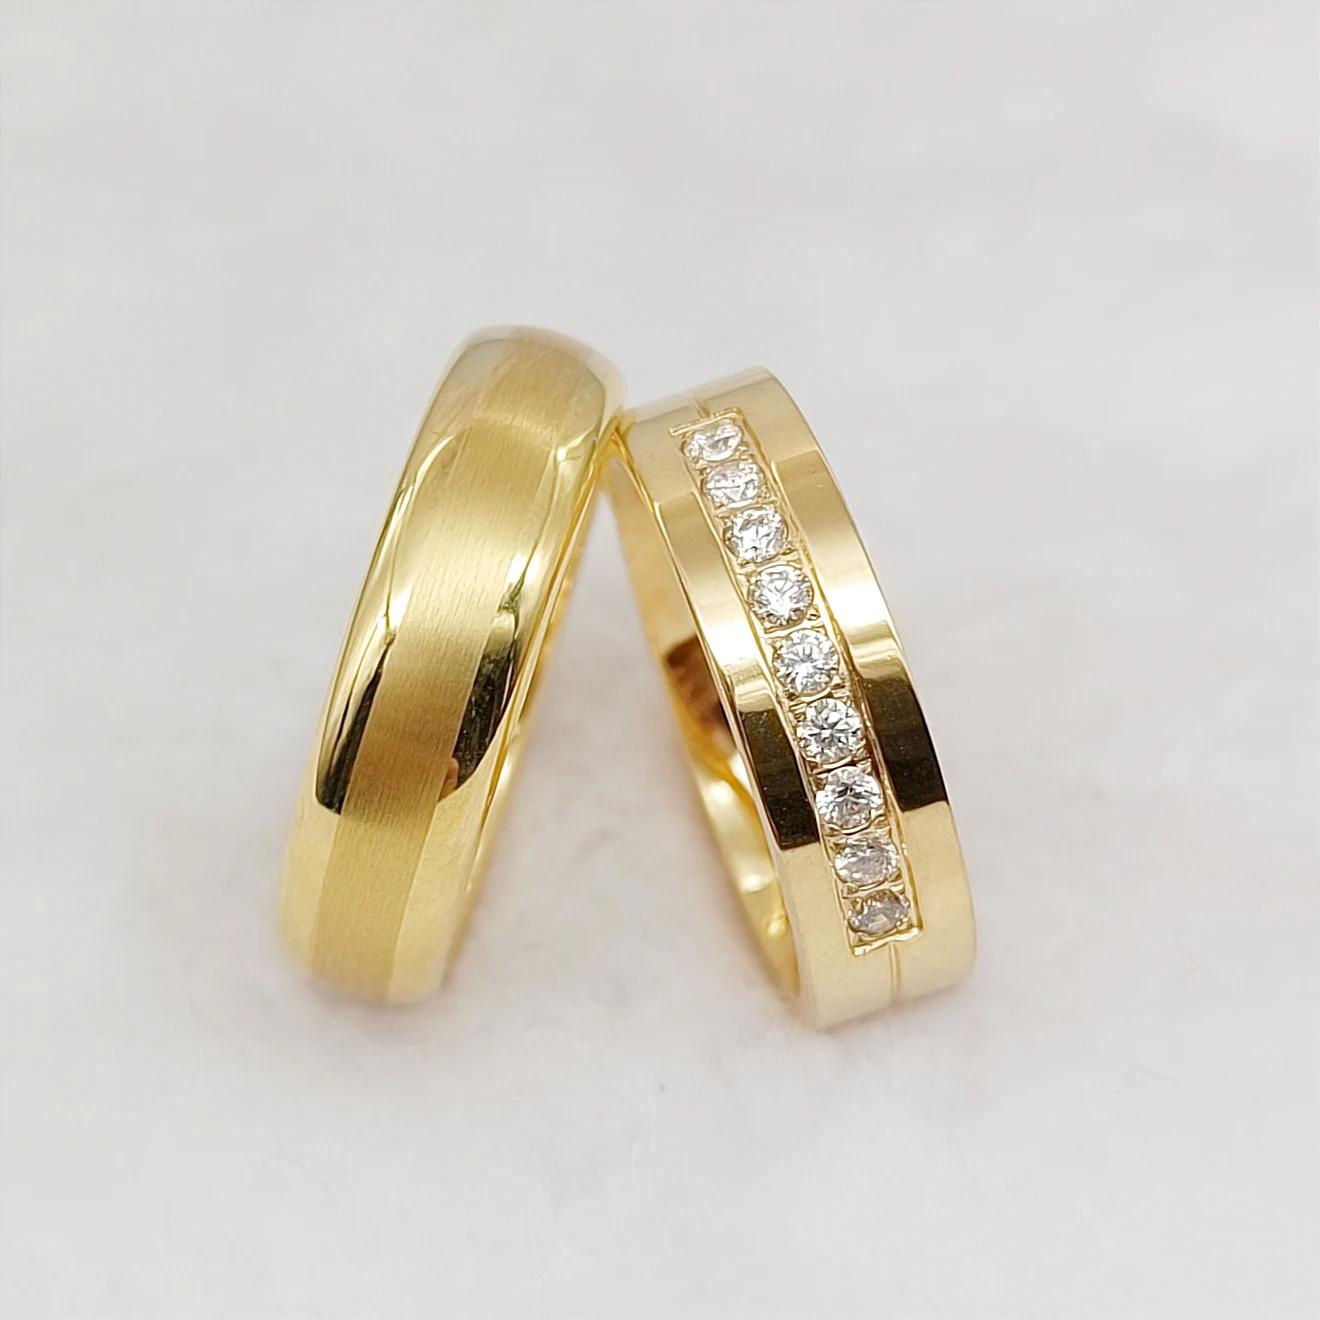 High Quality 1 Pair Matching Jewelry Lovers Ring Sets Mens Womens 18k gold plated Promise wedding rings designs for